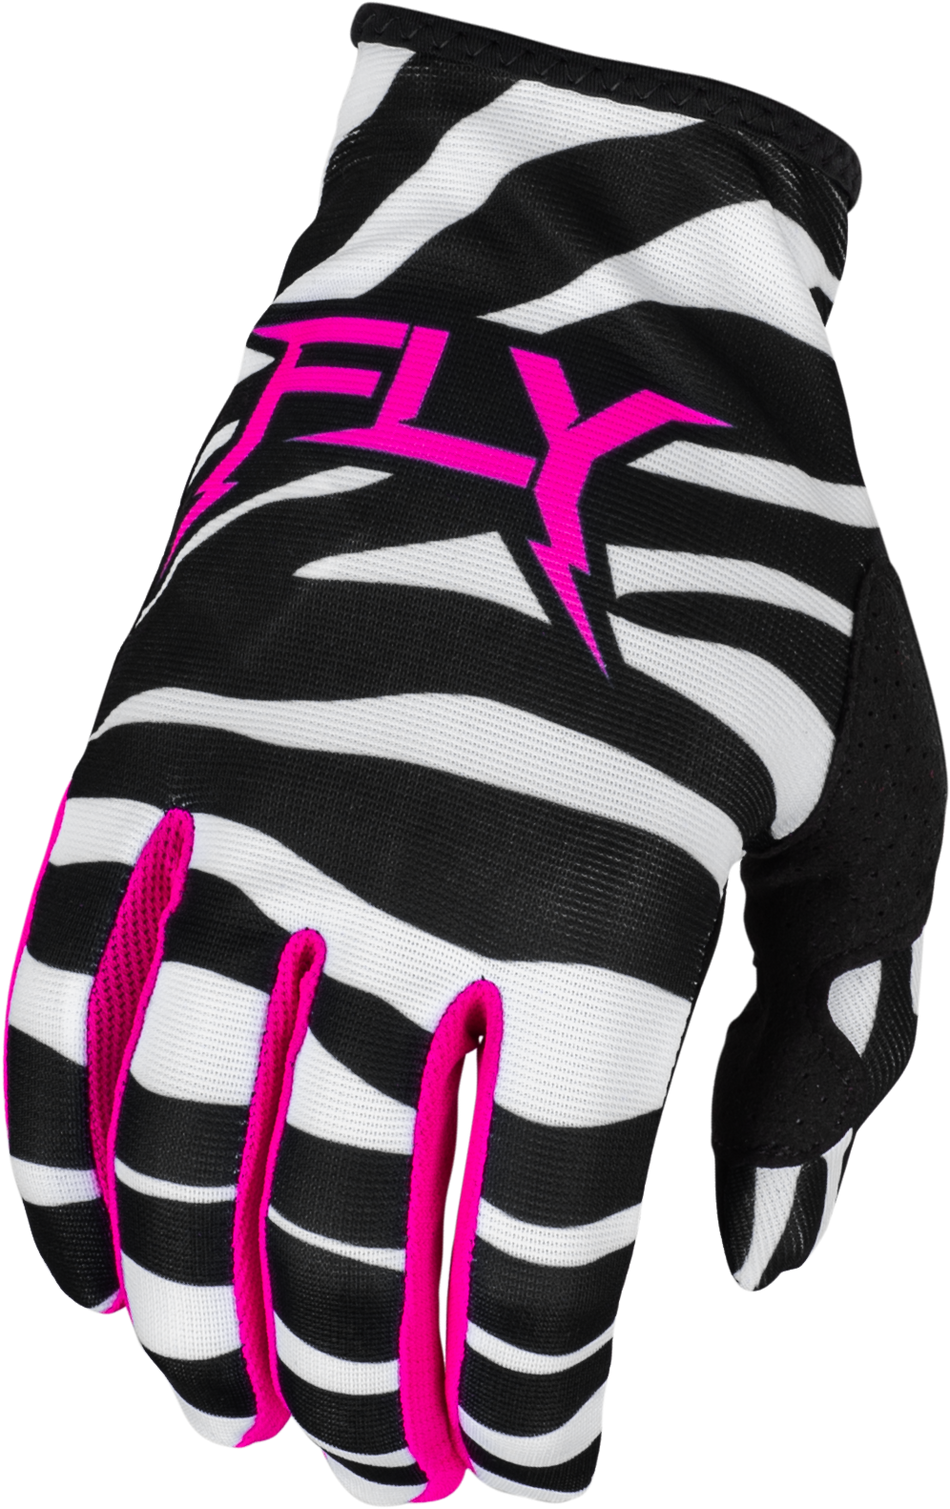 FLY RACING Youth Lite Uncaged Gloves Black/White/Neon Pink Ym 377-741YM